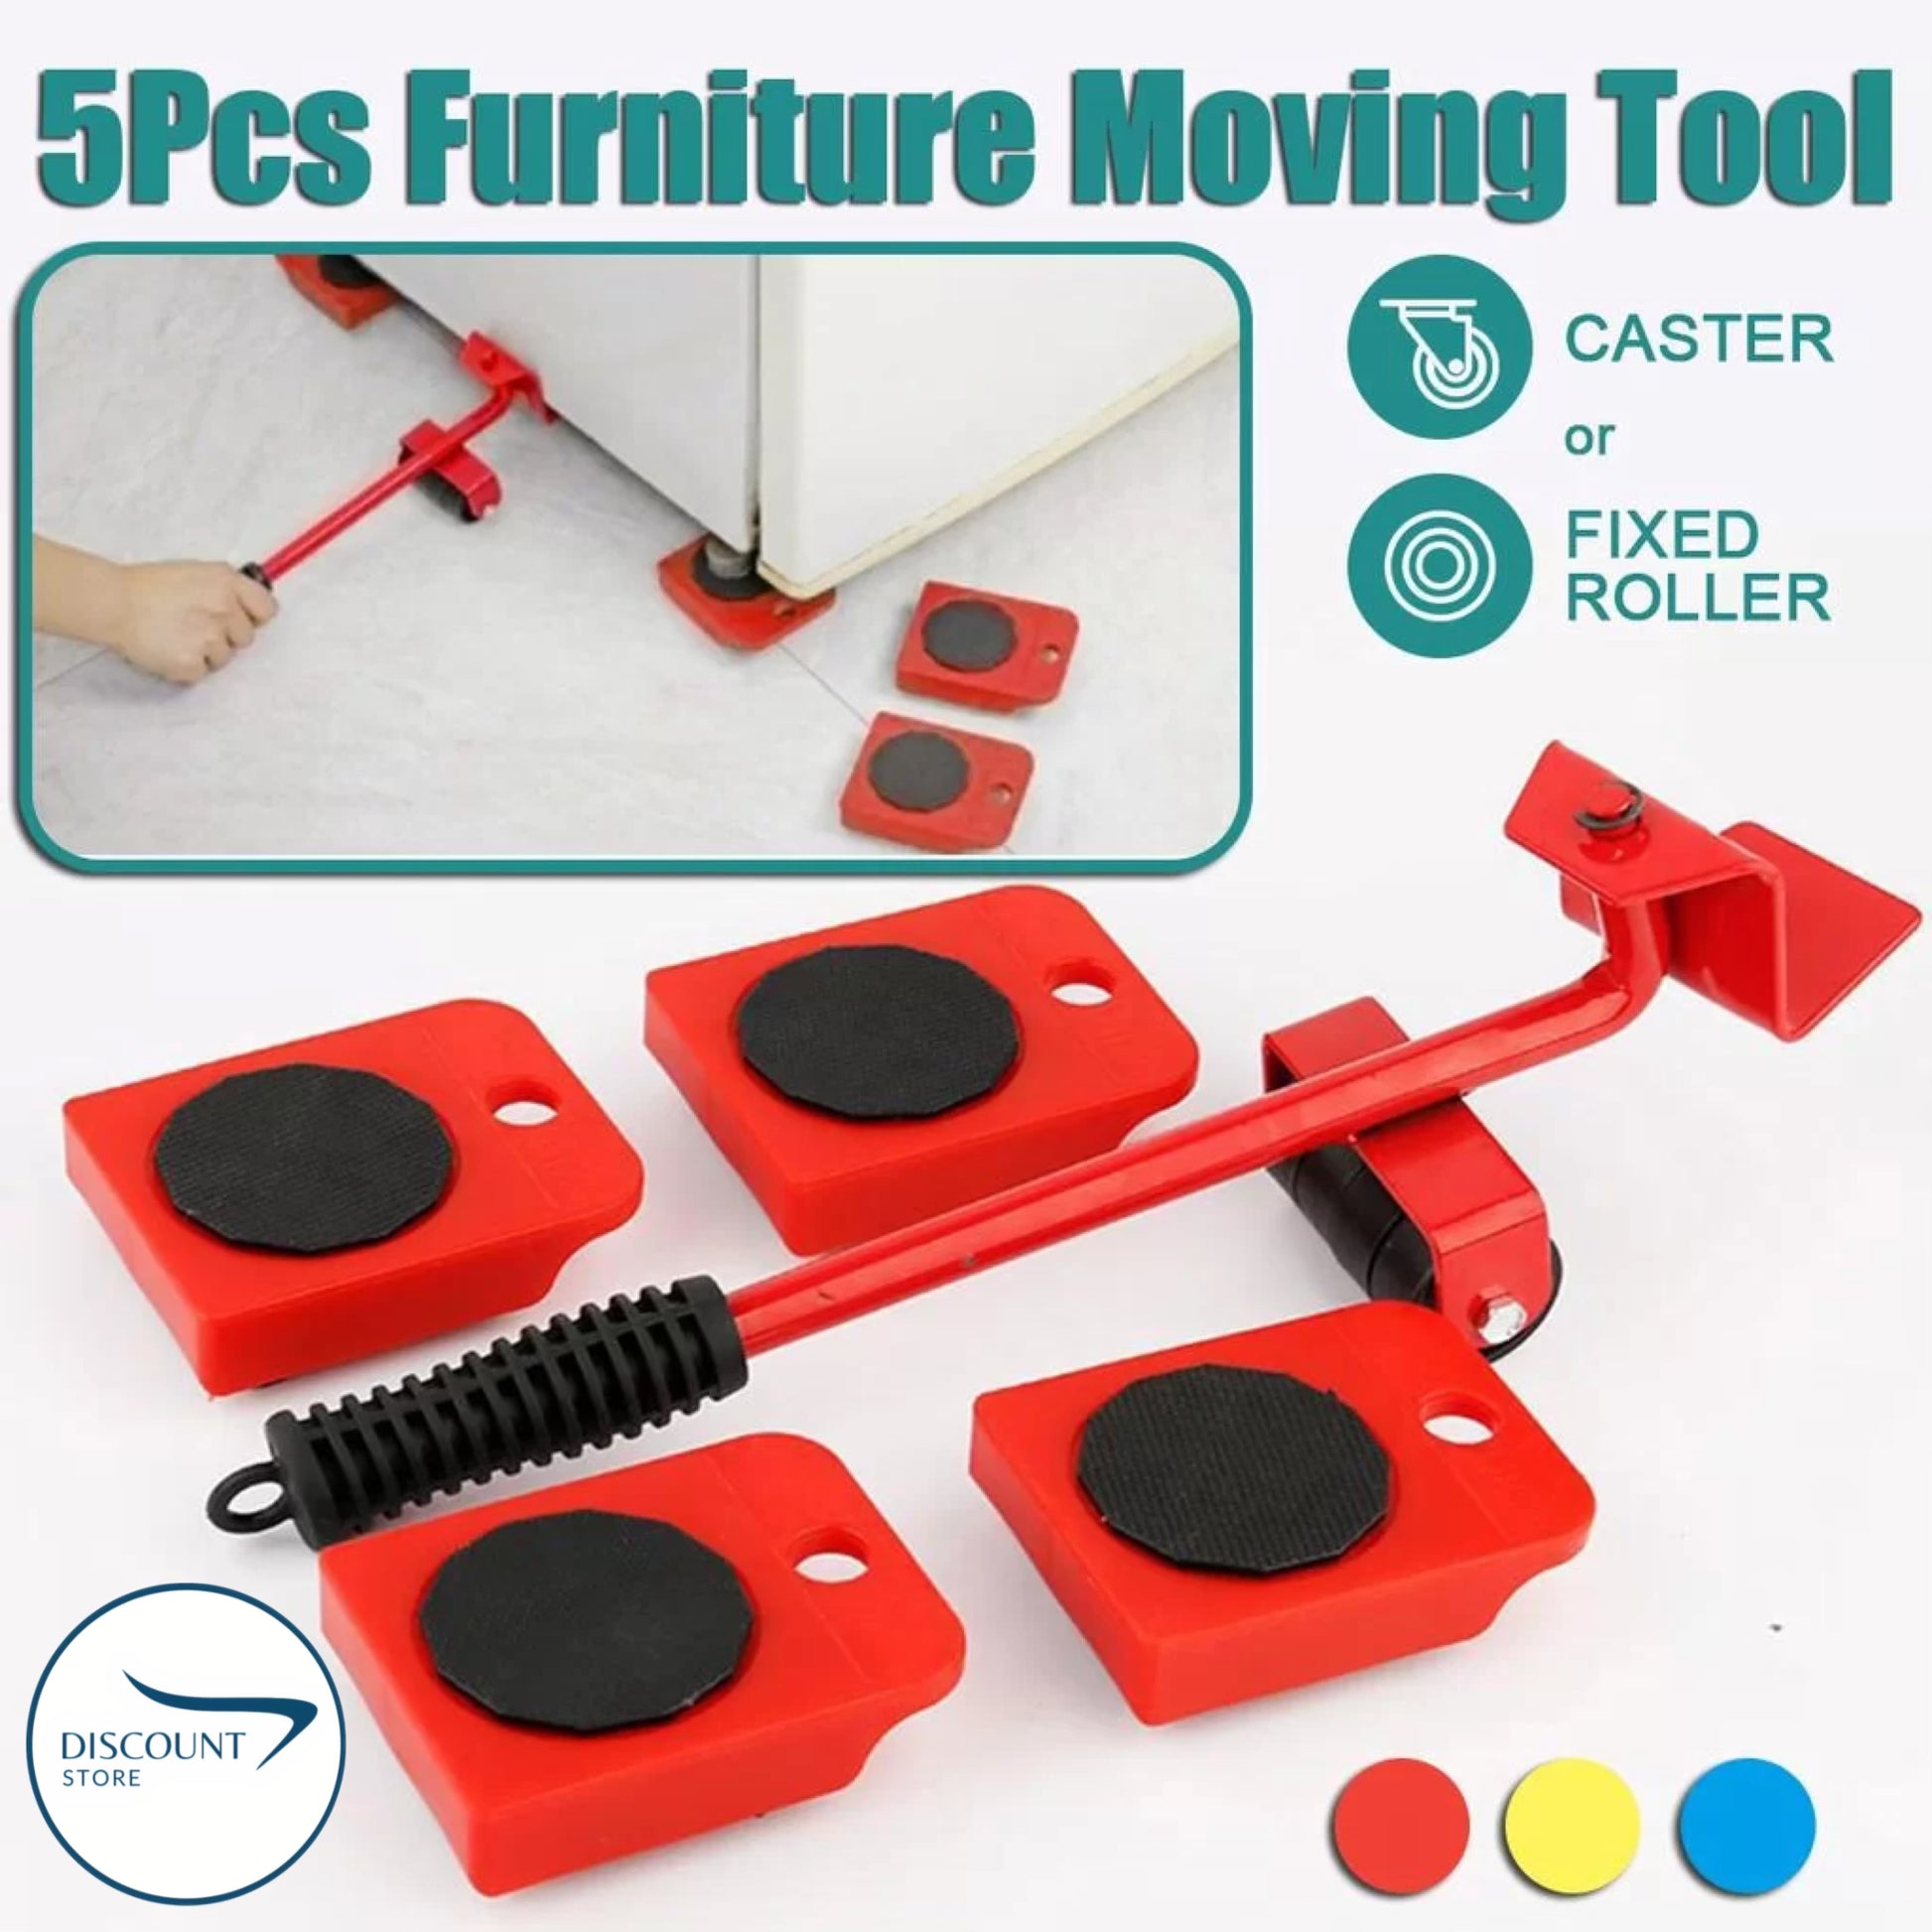 Buy (Set of 5) Furniture Mover Tool at Best Price in Pakistan